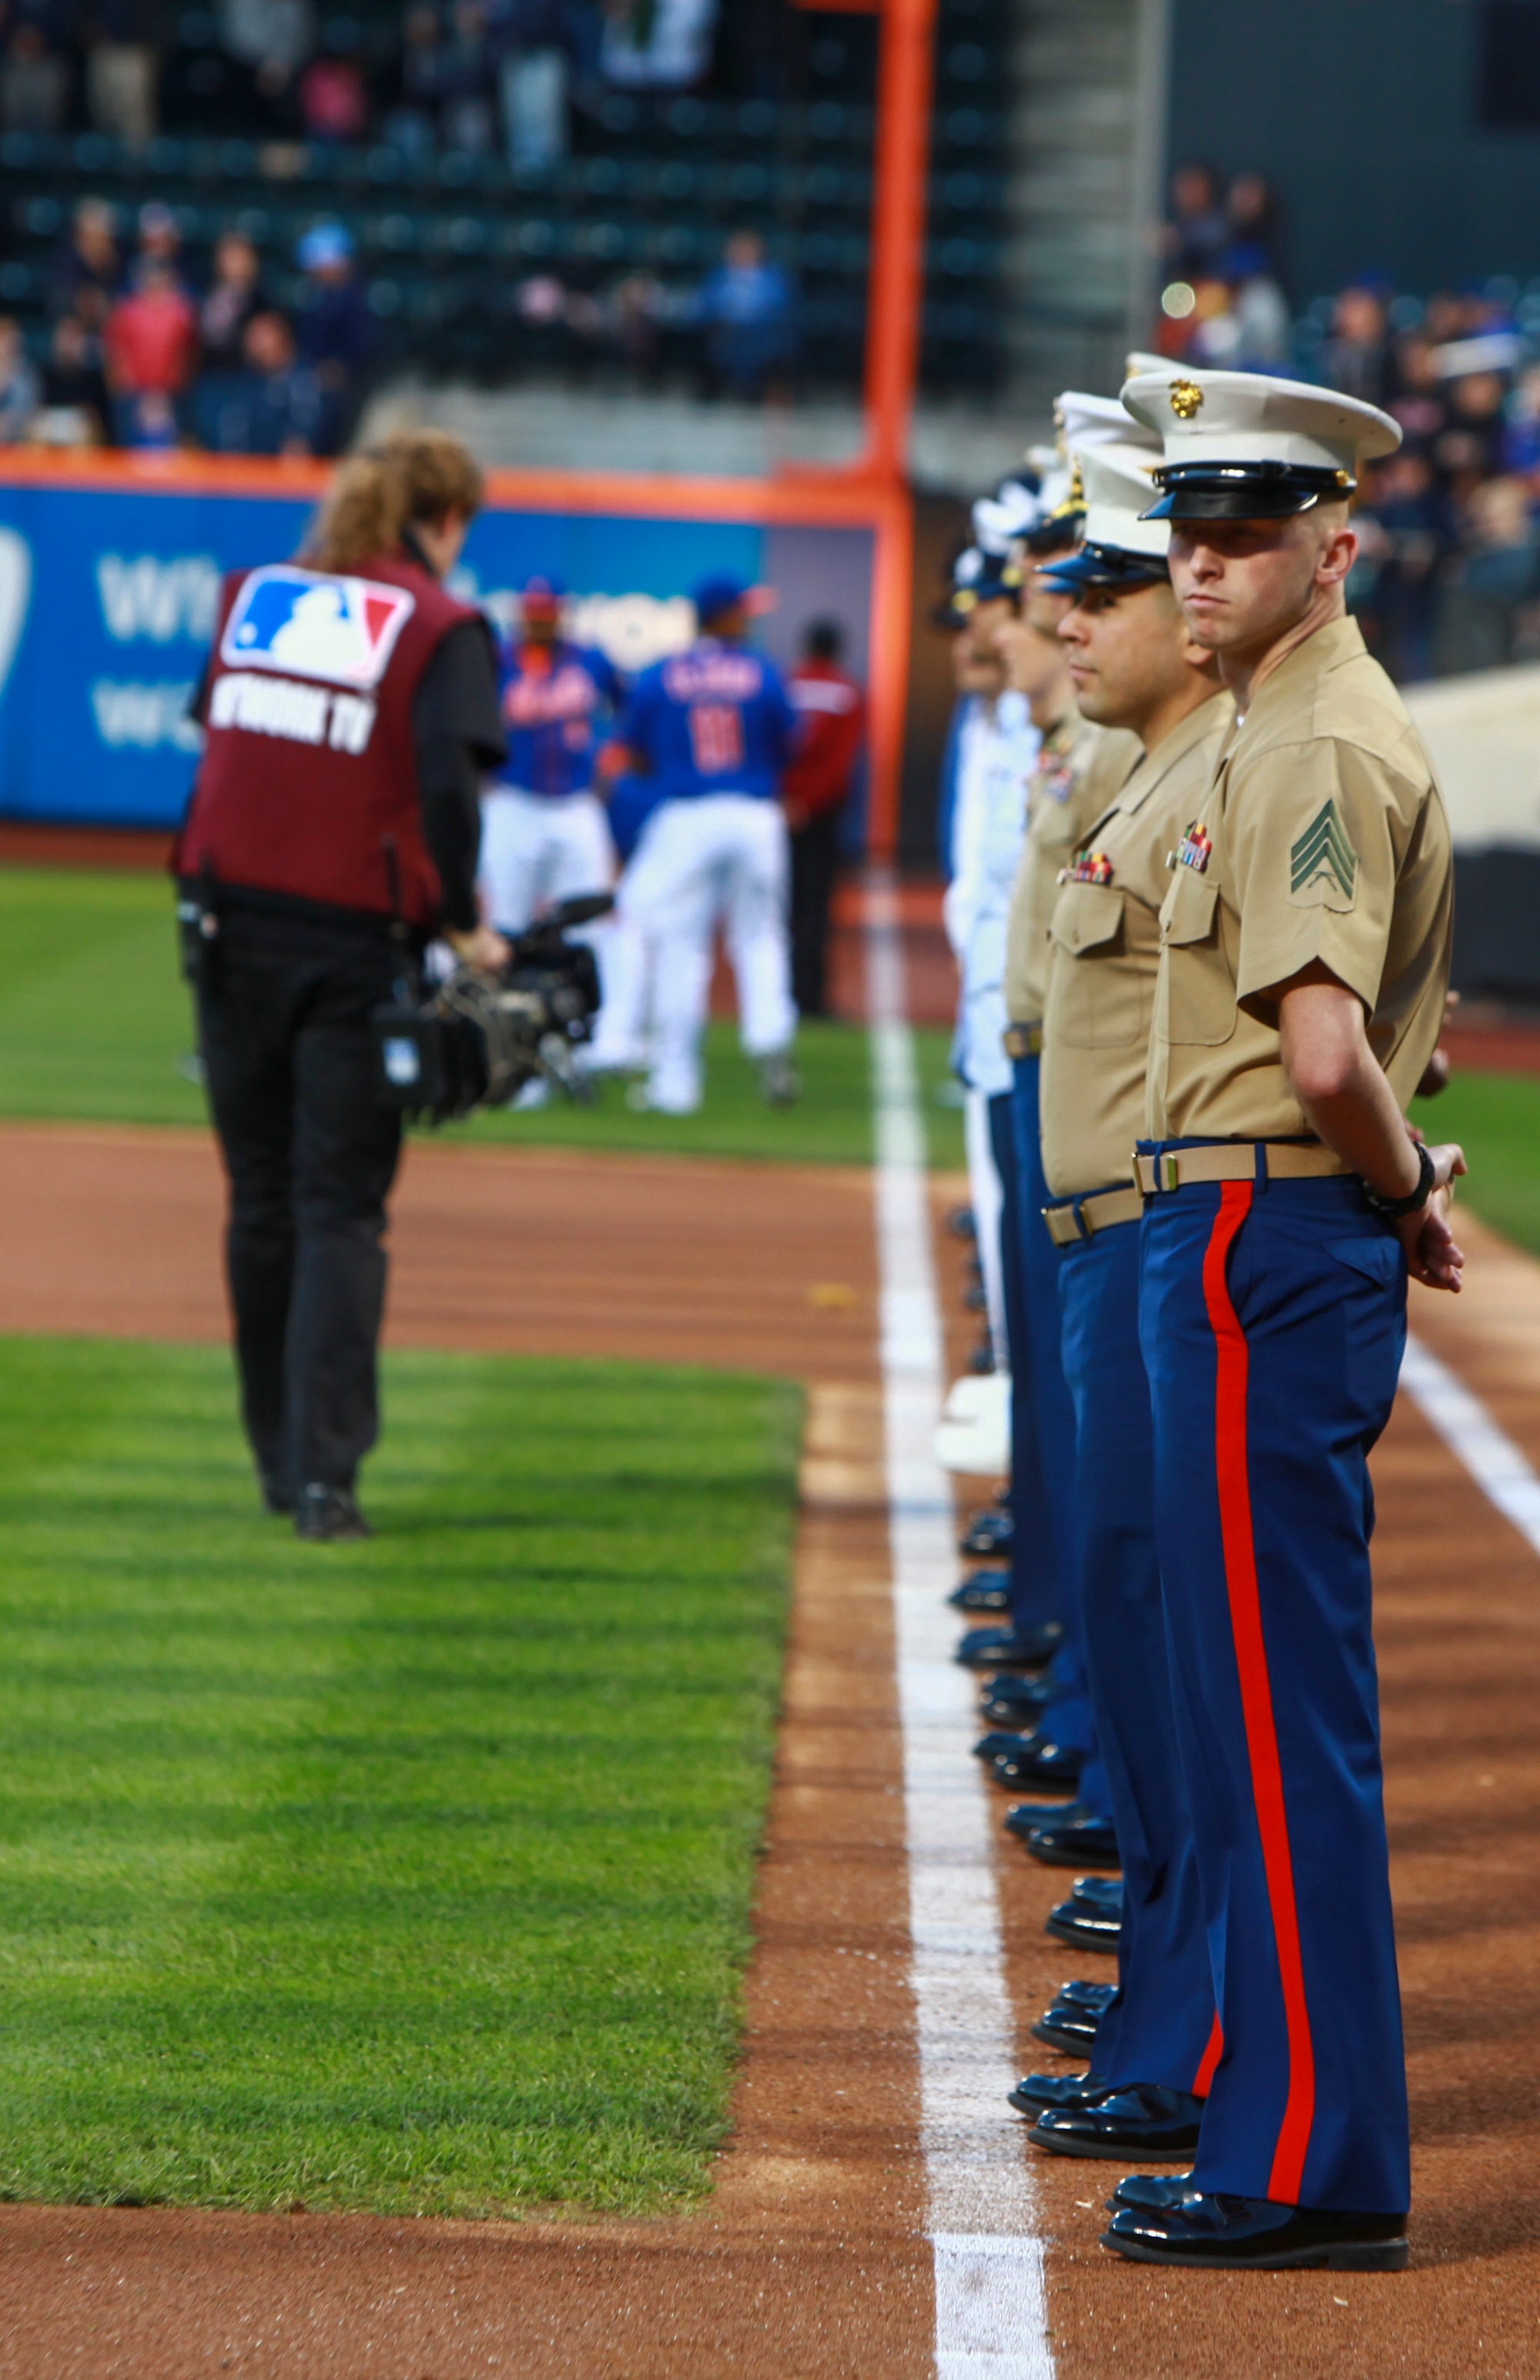 DVIDS - Images - Mets Military Appreciation [Image 6 of 10]